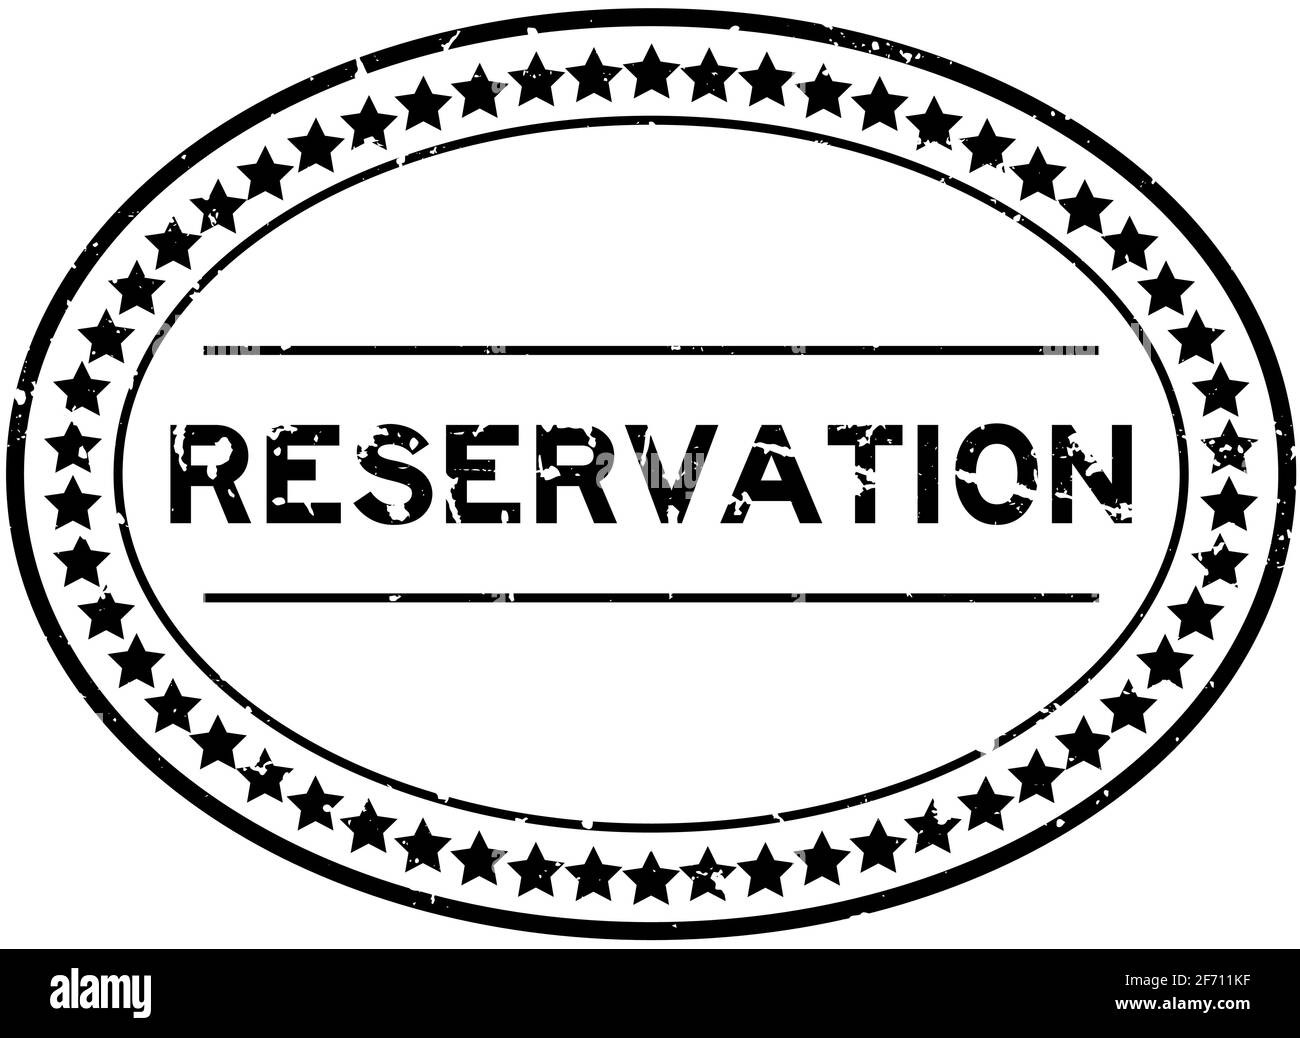 Grunge black reservation word oval rubber seal stamp on white background Stock Vector